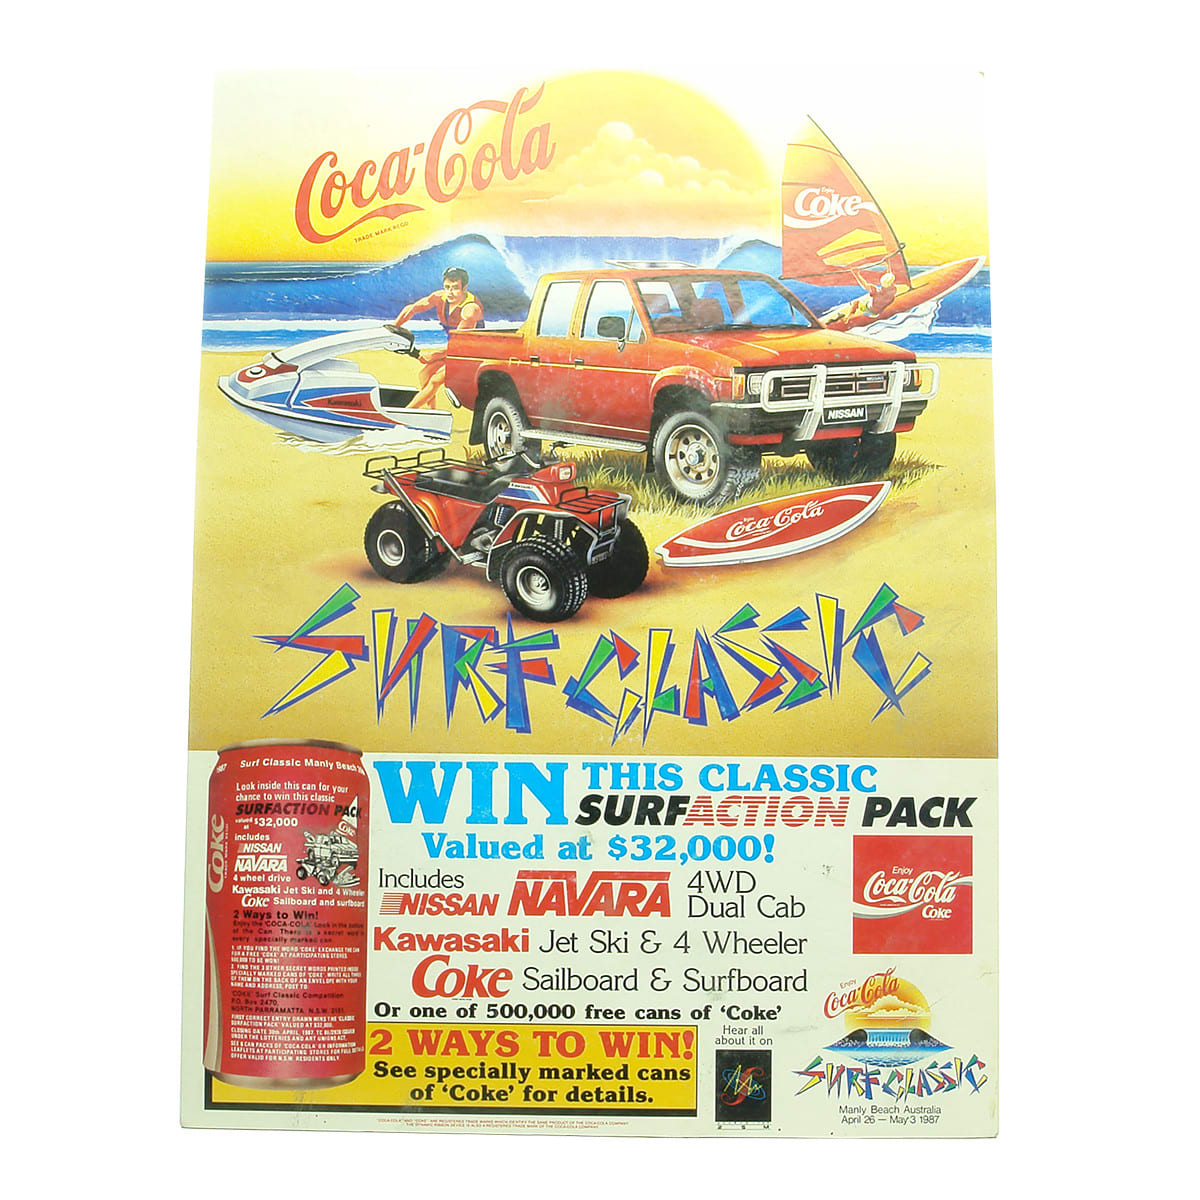 Point of Sale Cardboard Display. Coca Cola Surf Classic. Manly Beach 1987. Various prizes and picture of promotional can of Coke.